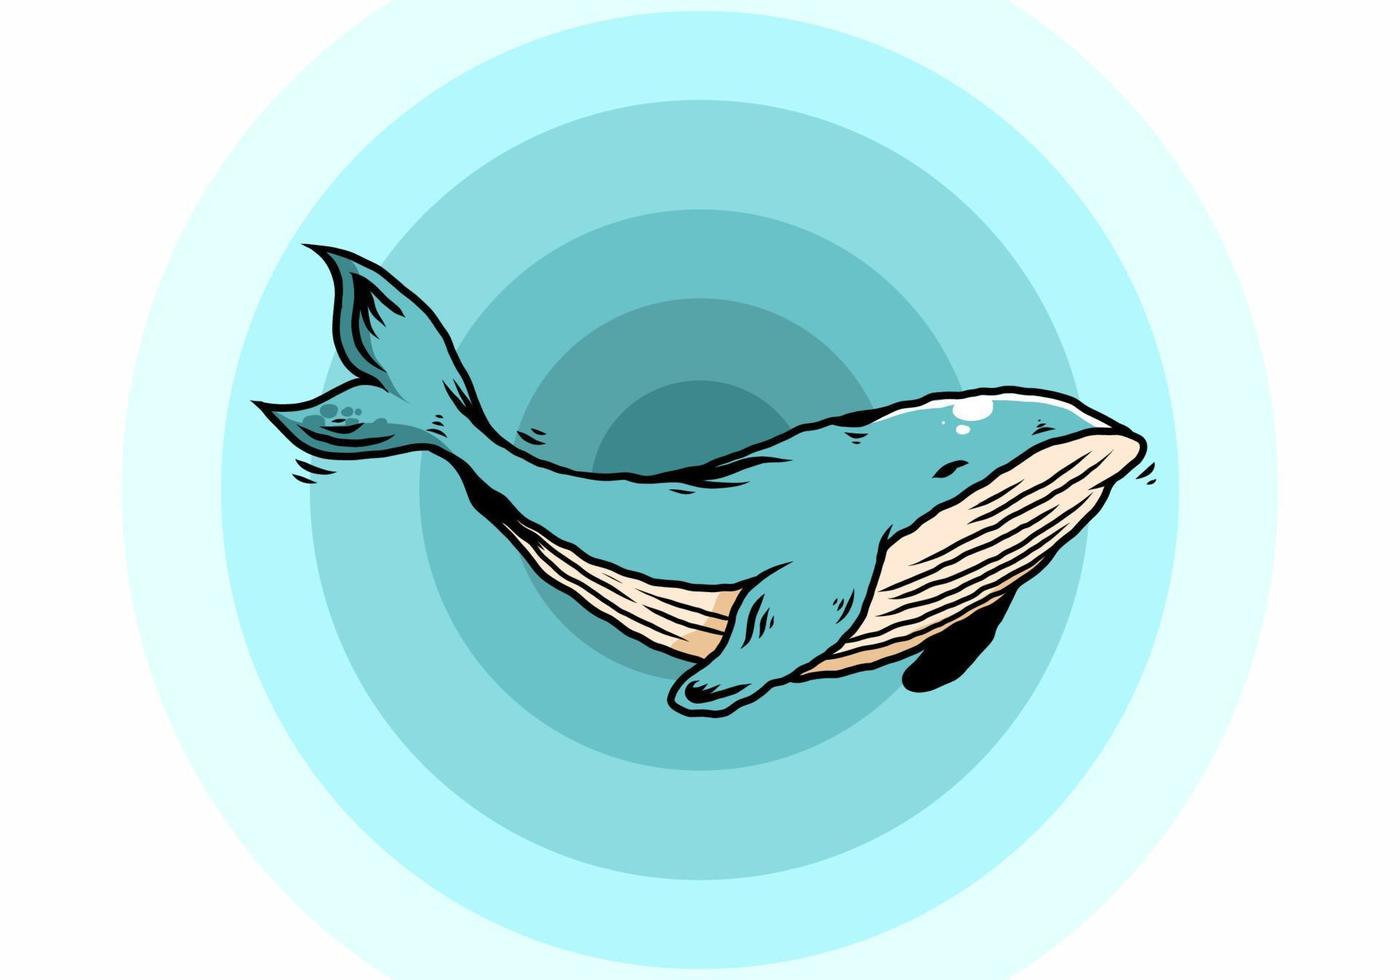 The big whale of ocean illustration vector